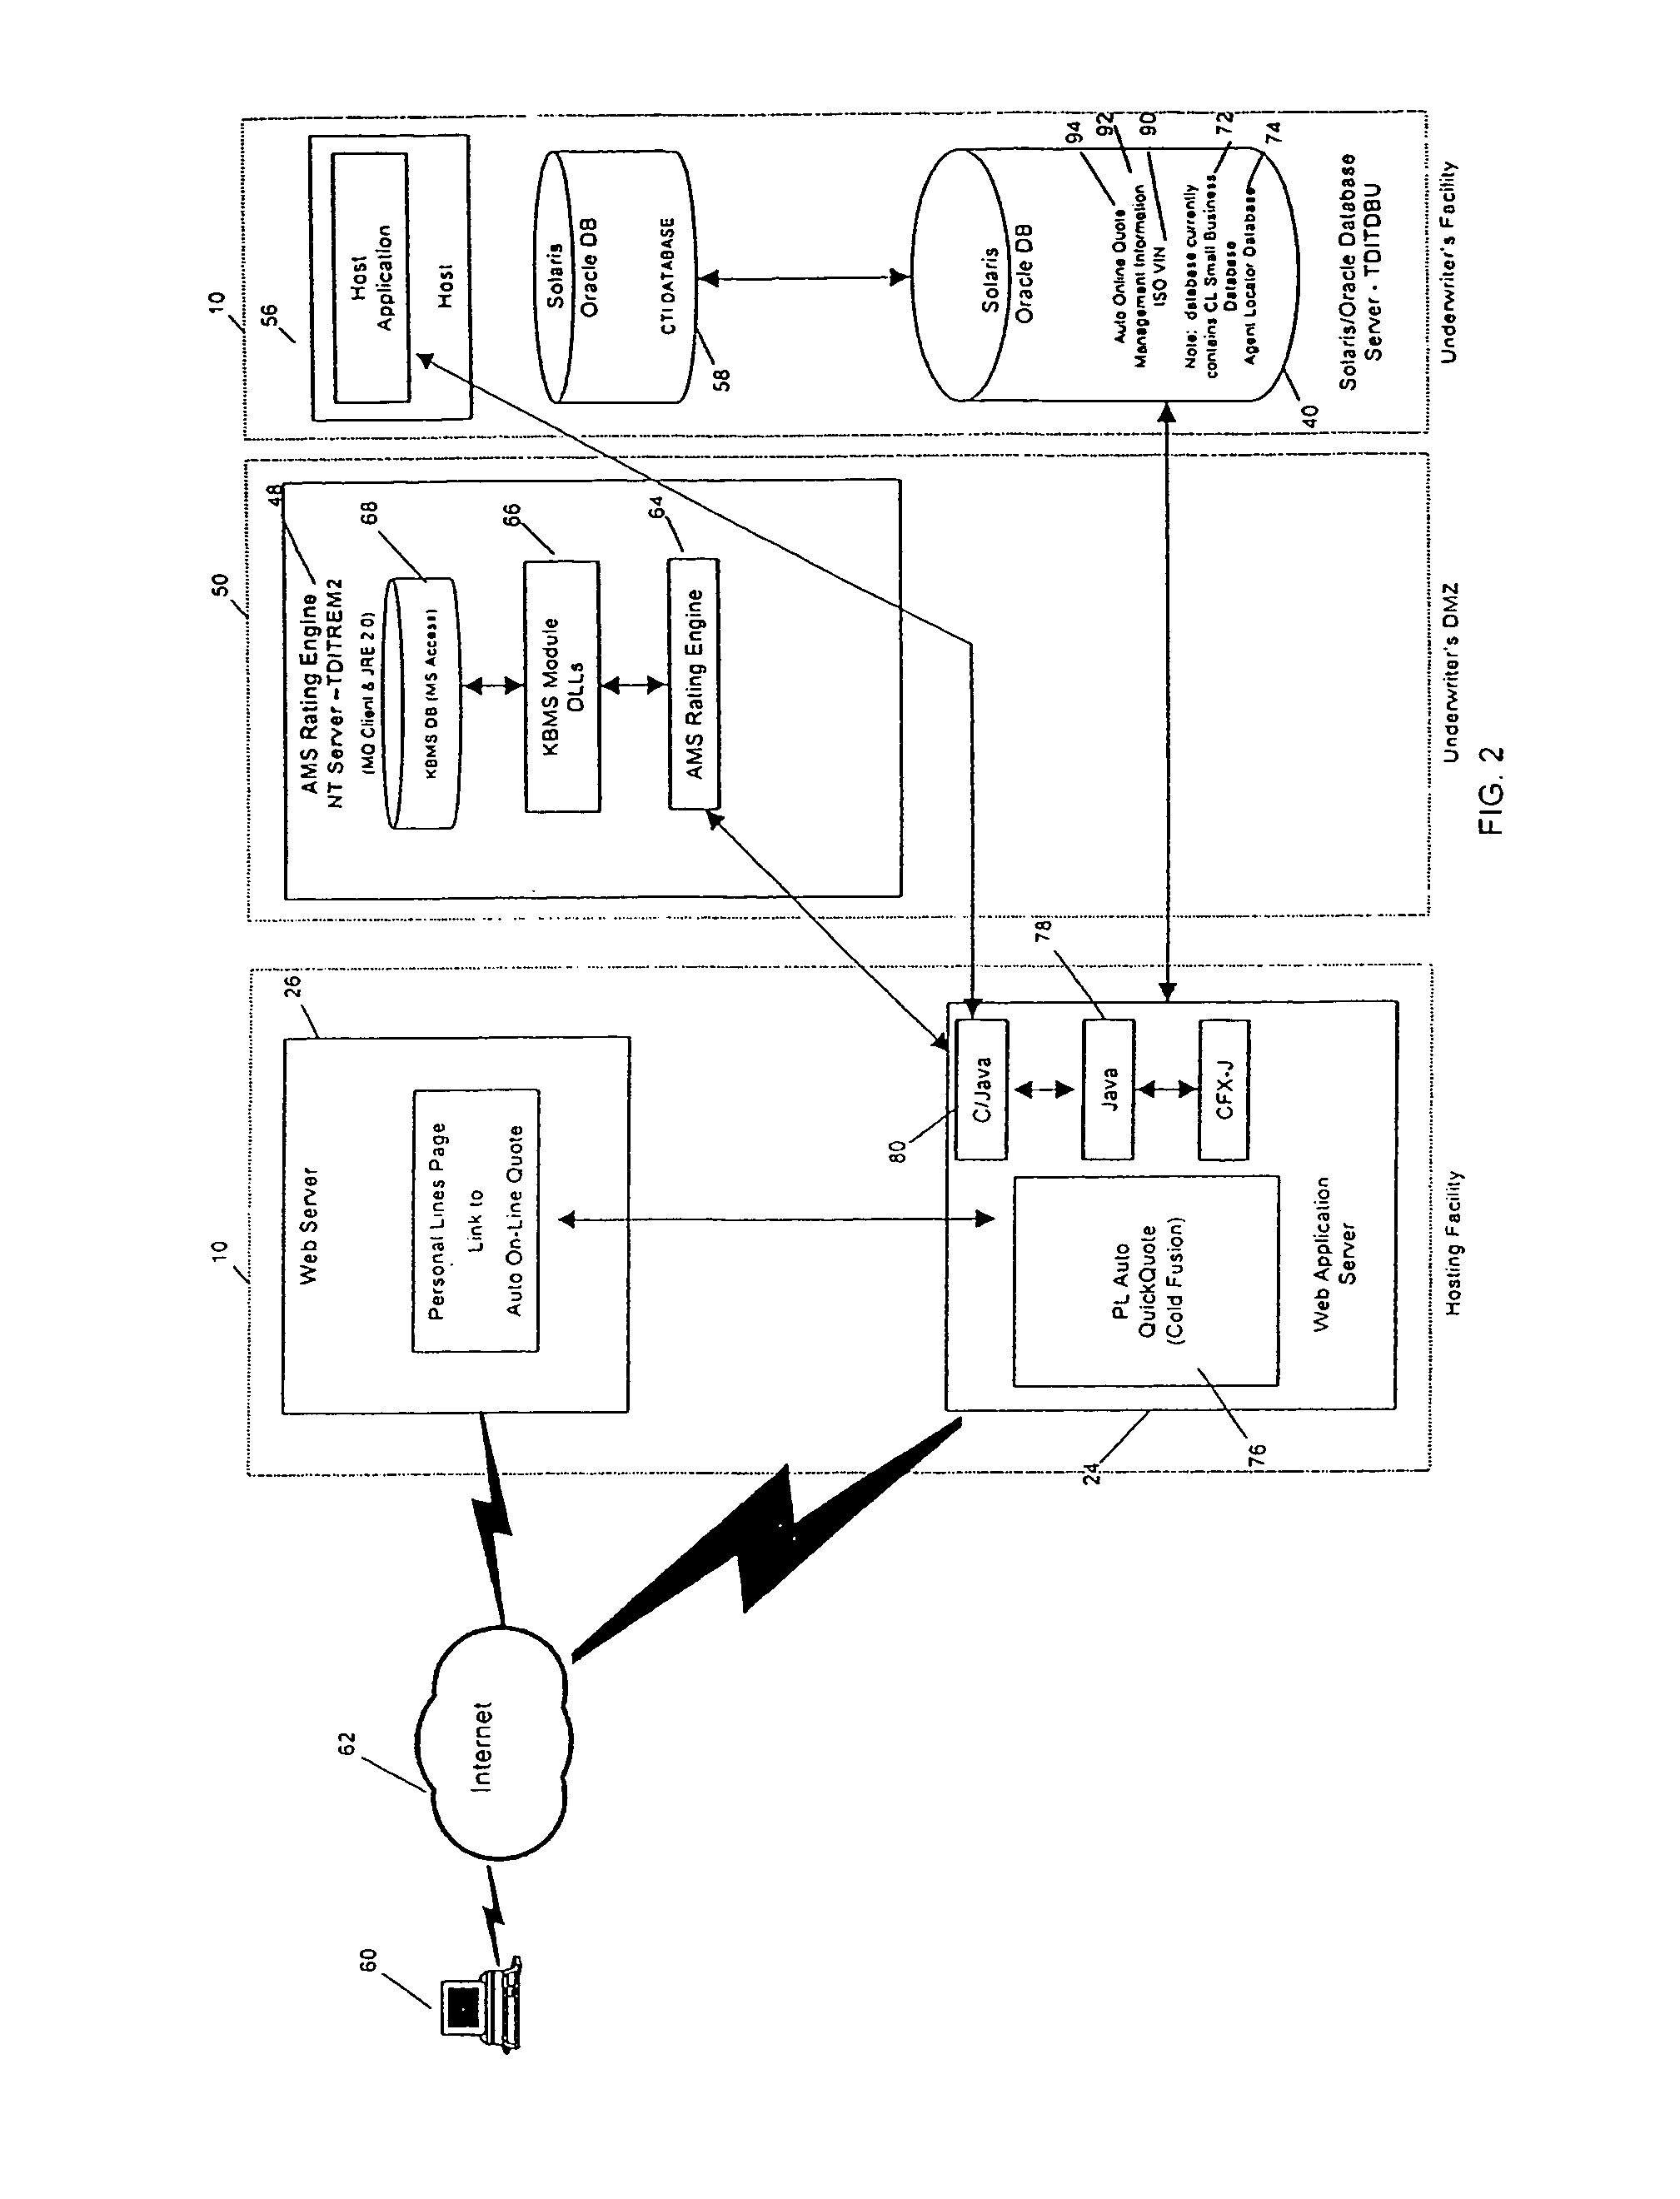 System and method for providing insurance data processing services via a user interface